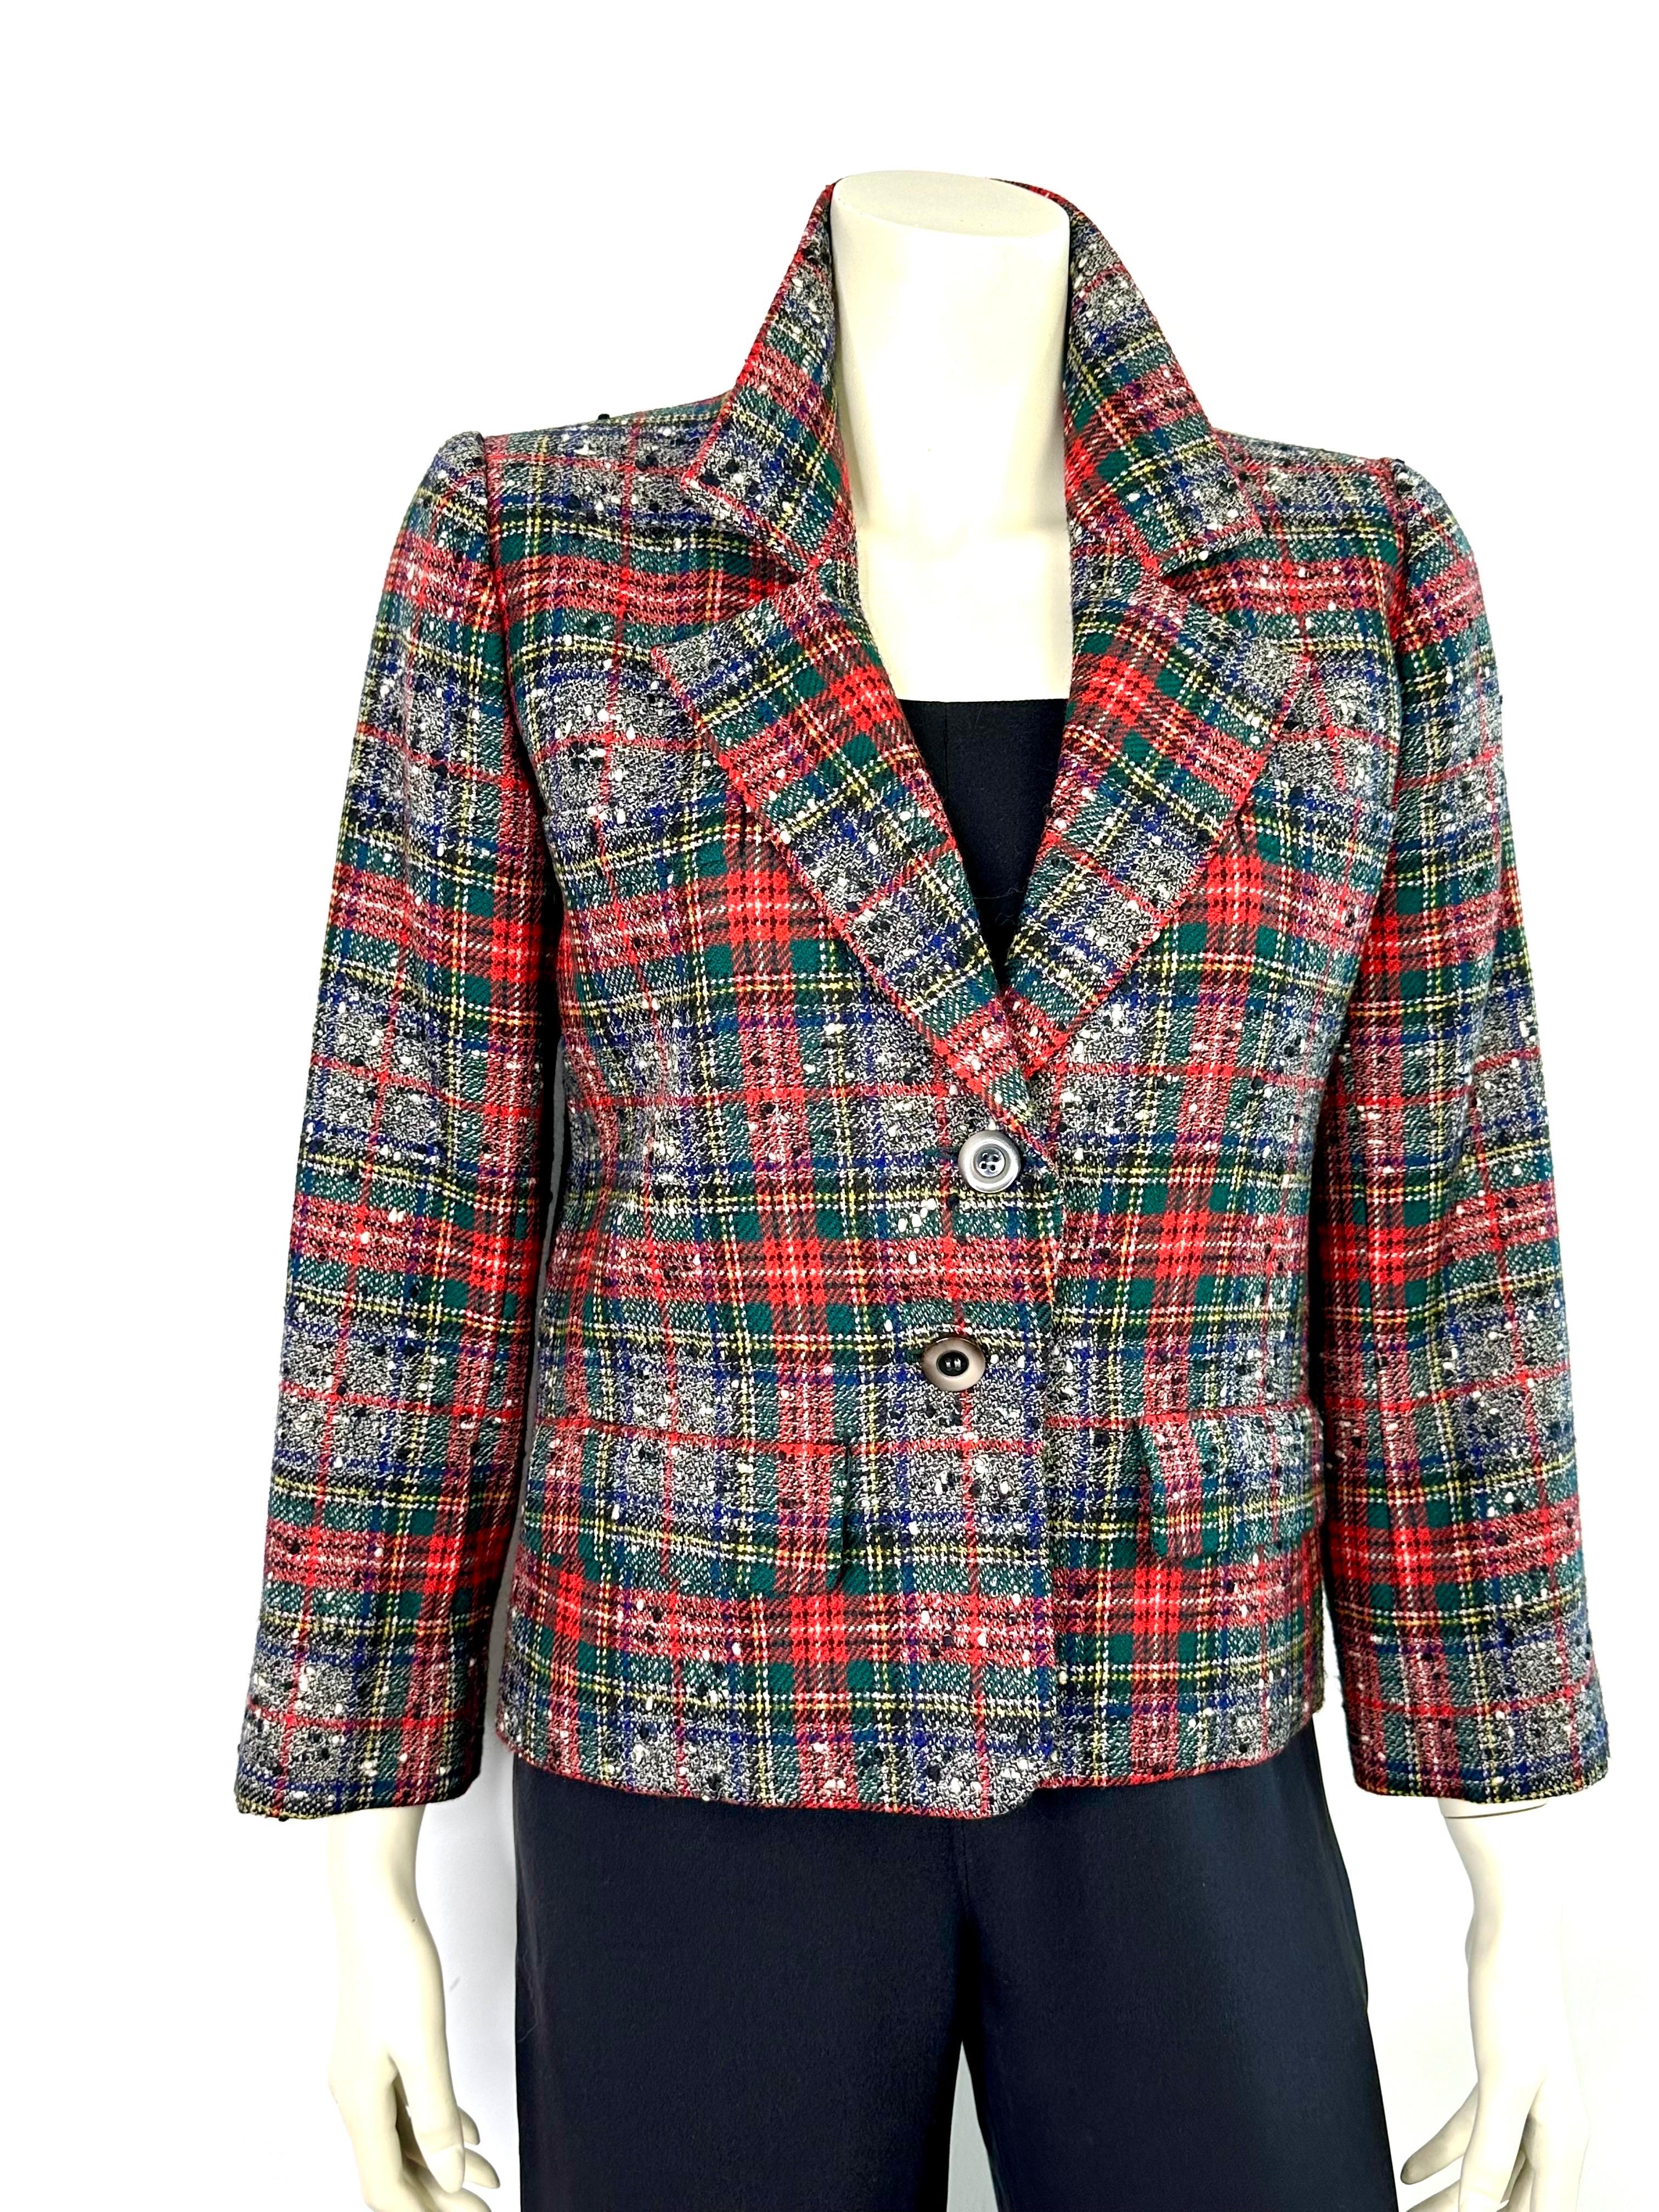 Yves saint Laurent wool jacket in white speckled tartan print.
Straight cut, button closure .
2 pockets with flaps
Composition label is missing
Inner lining shows stains
Size 38
Shoulder width 38cm
Chest width 49cm
Length 58cm
Sleeve length